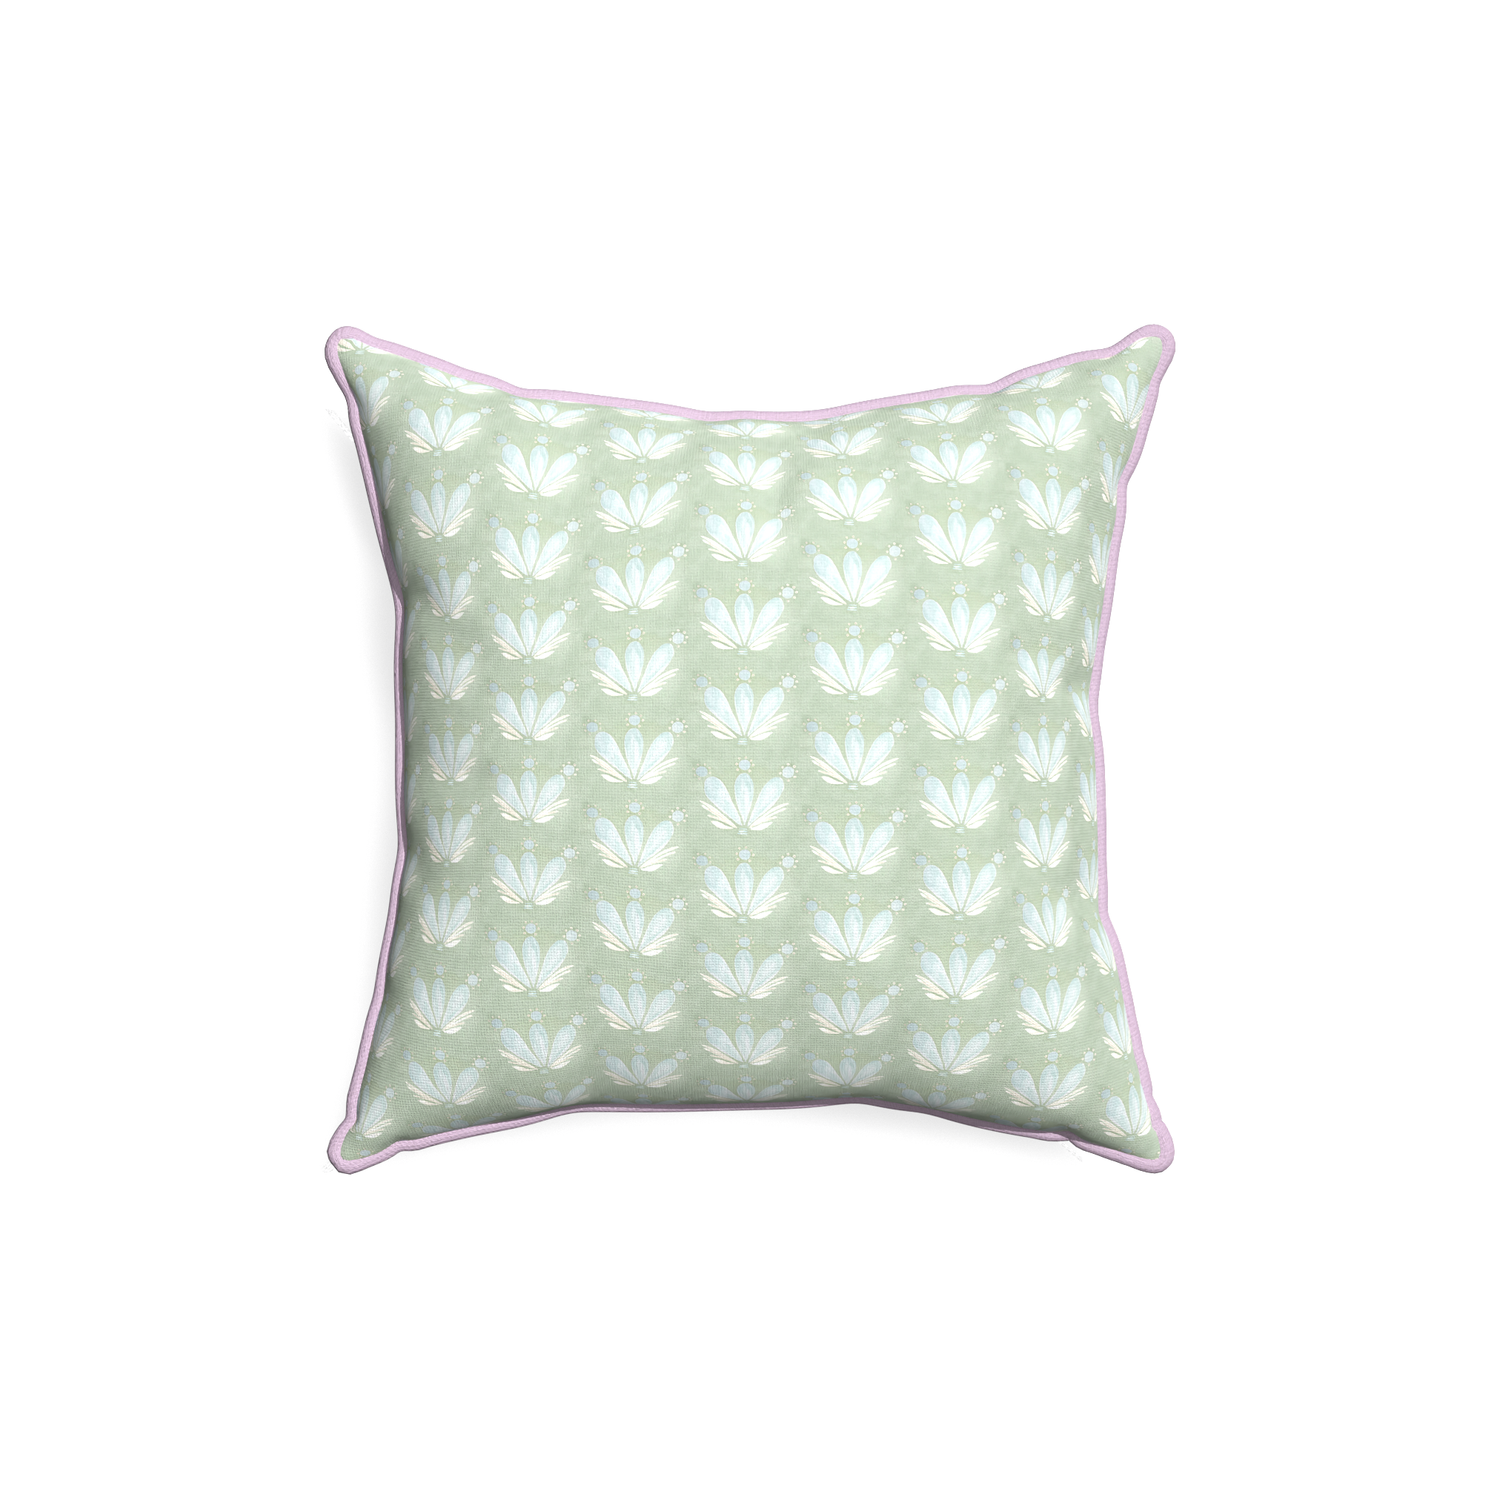 18-square serena sea salt custom blue & green floral drop repeatpillow with l piping on white background